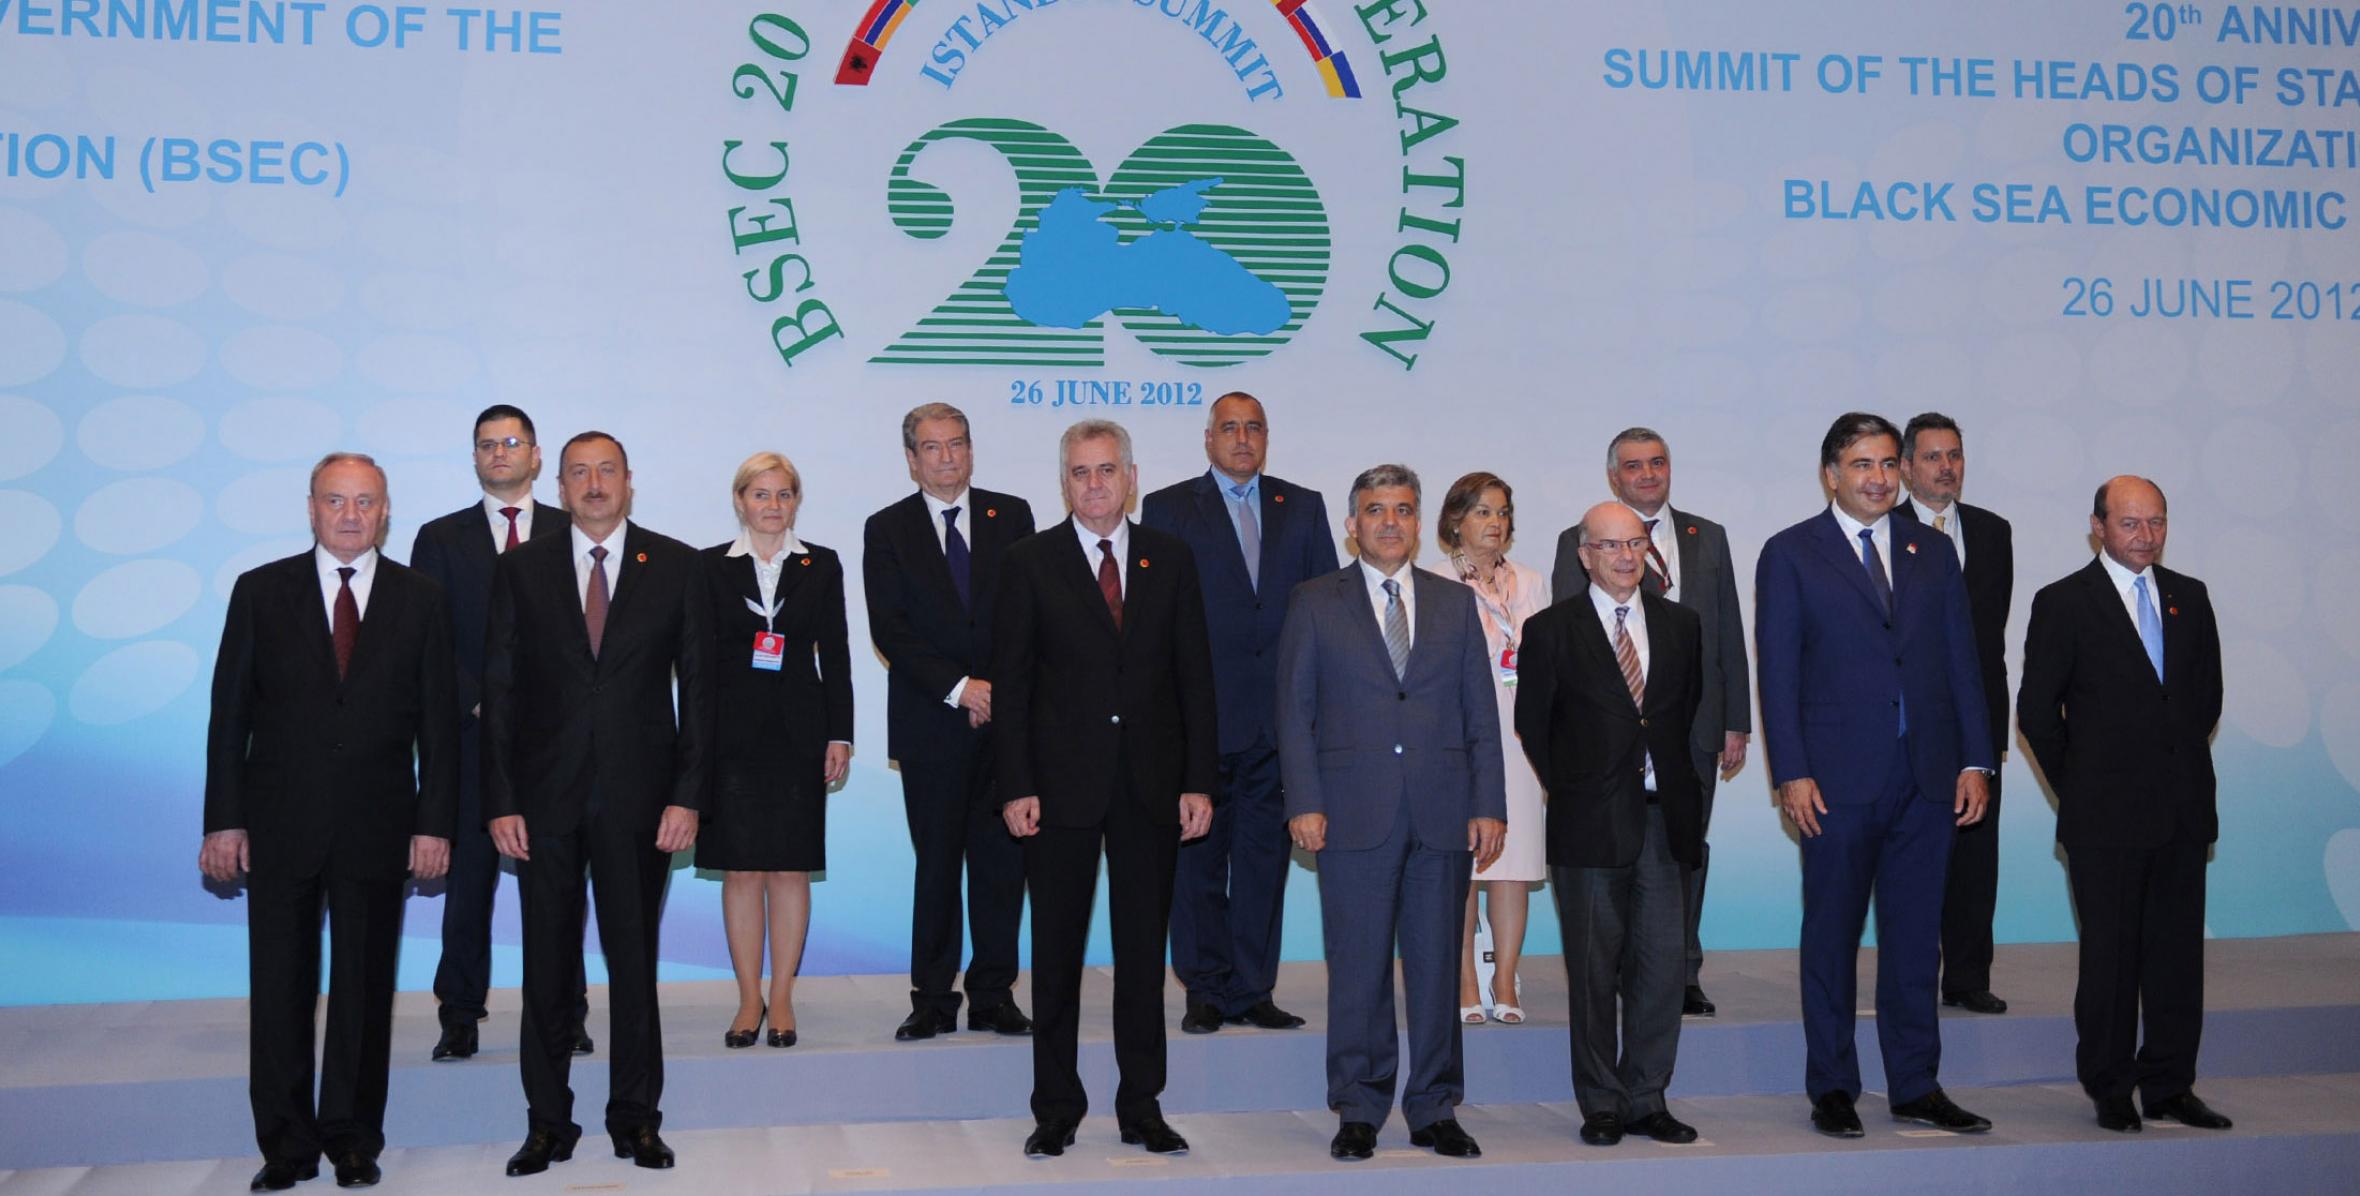 Ilham Aliyev attended a summit on the occasion of the 20th anniversary of the Black Sea Economic Cooperation Organization